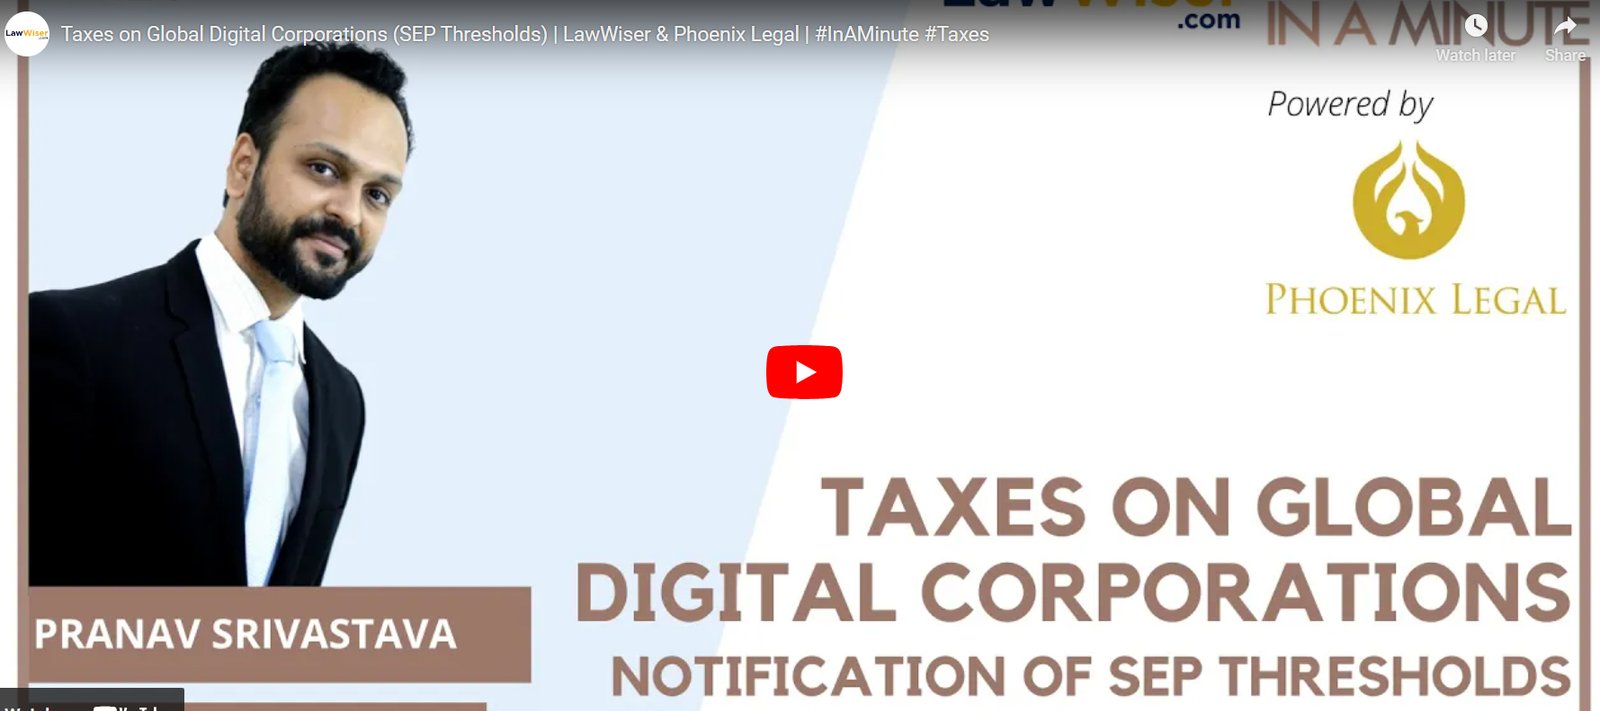 Taxes on Global Digital Corporations (SEP Thresholds) | LawWiser & Phoenix Legal | #InAMinute